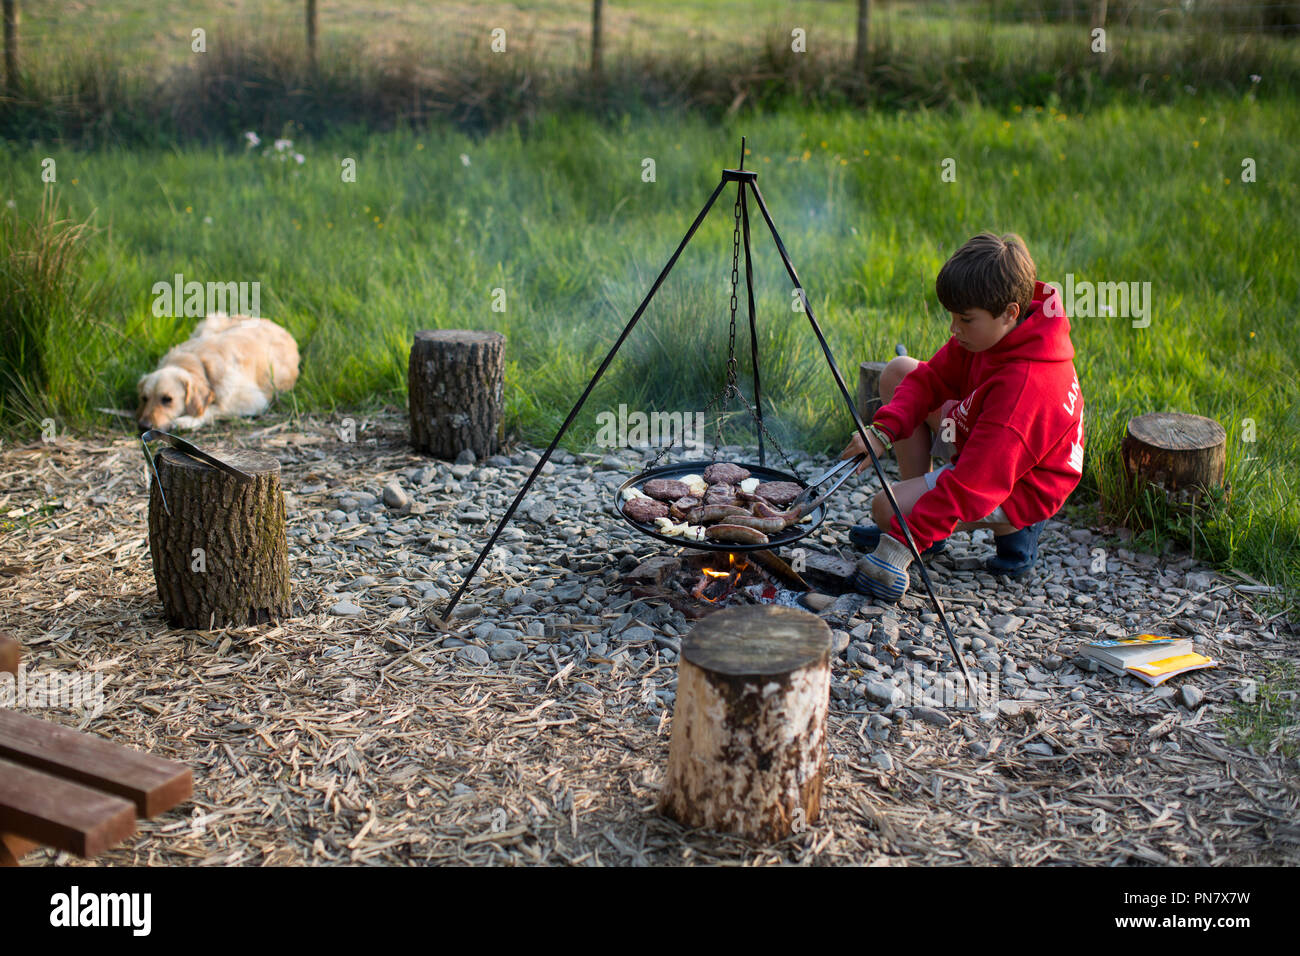 A young boy cooking on an open camp fire. Stock Photo